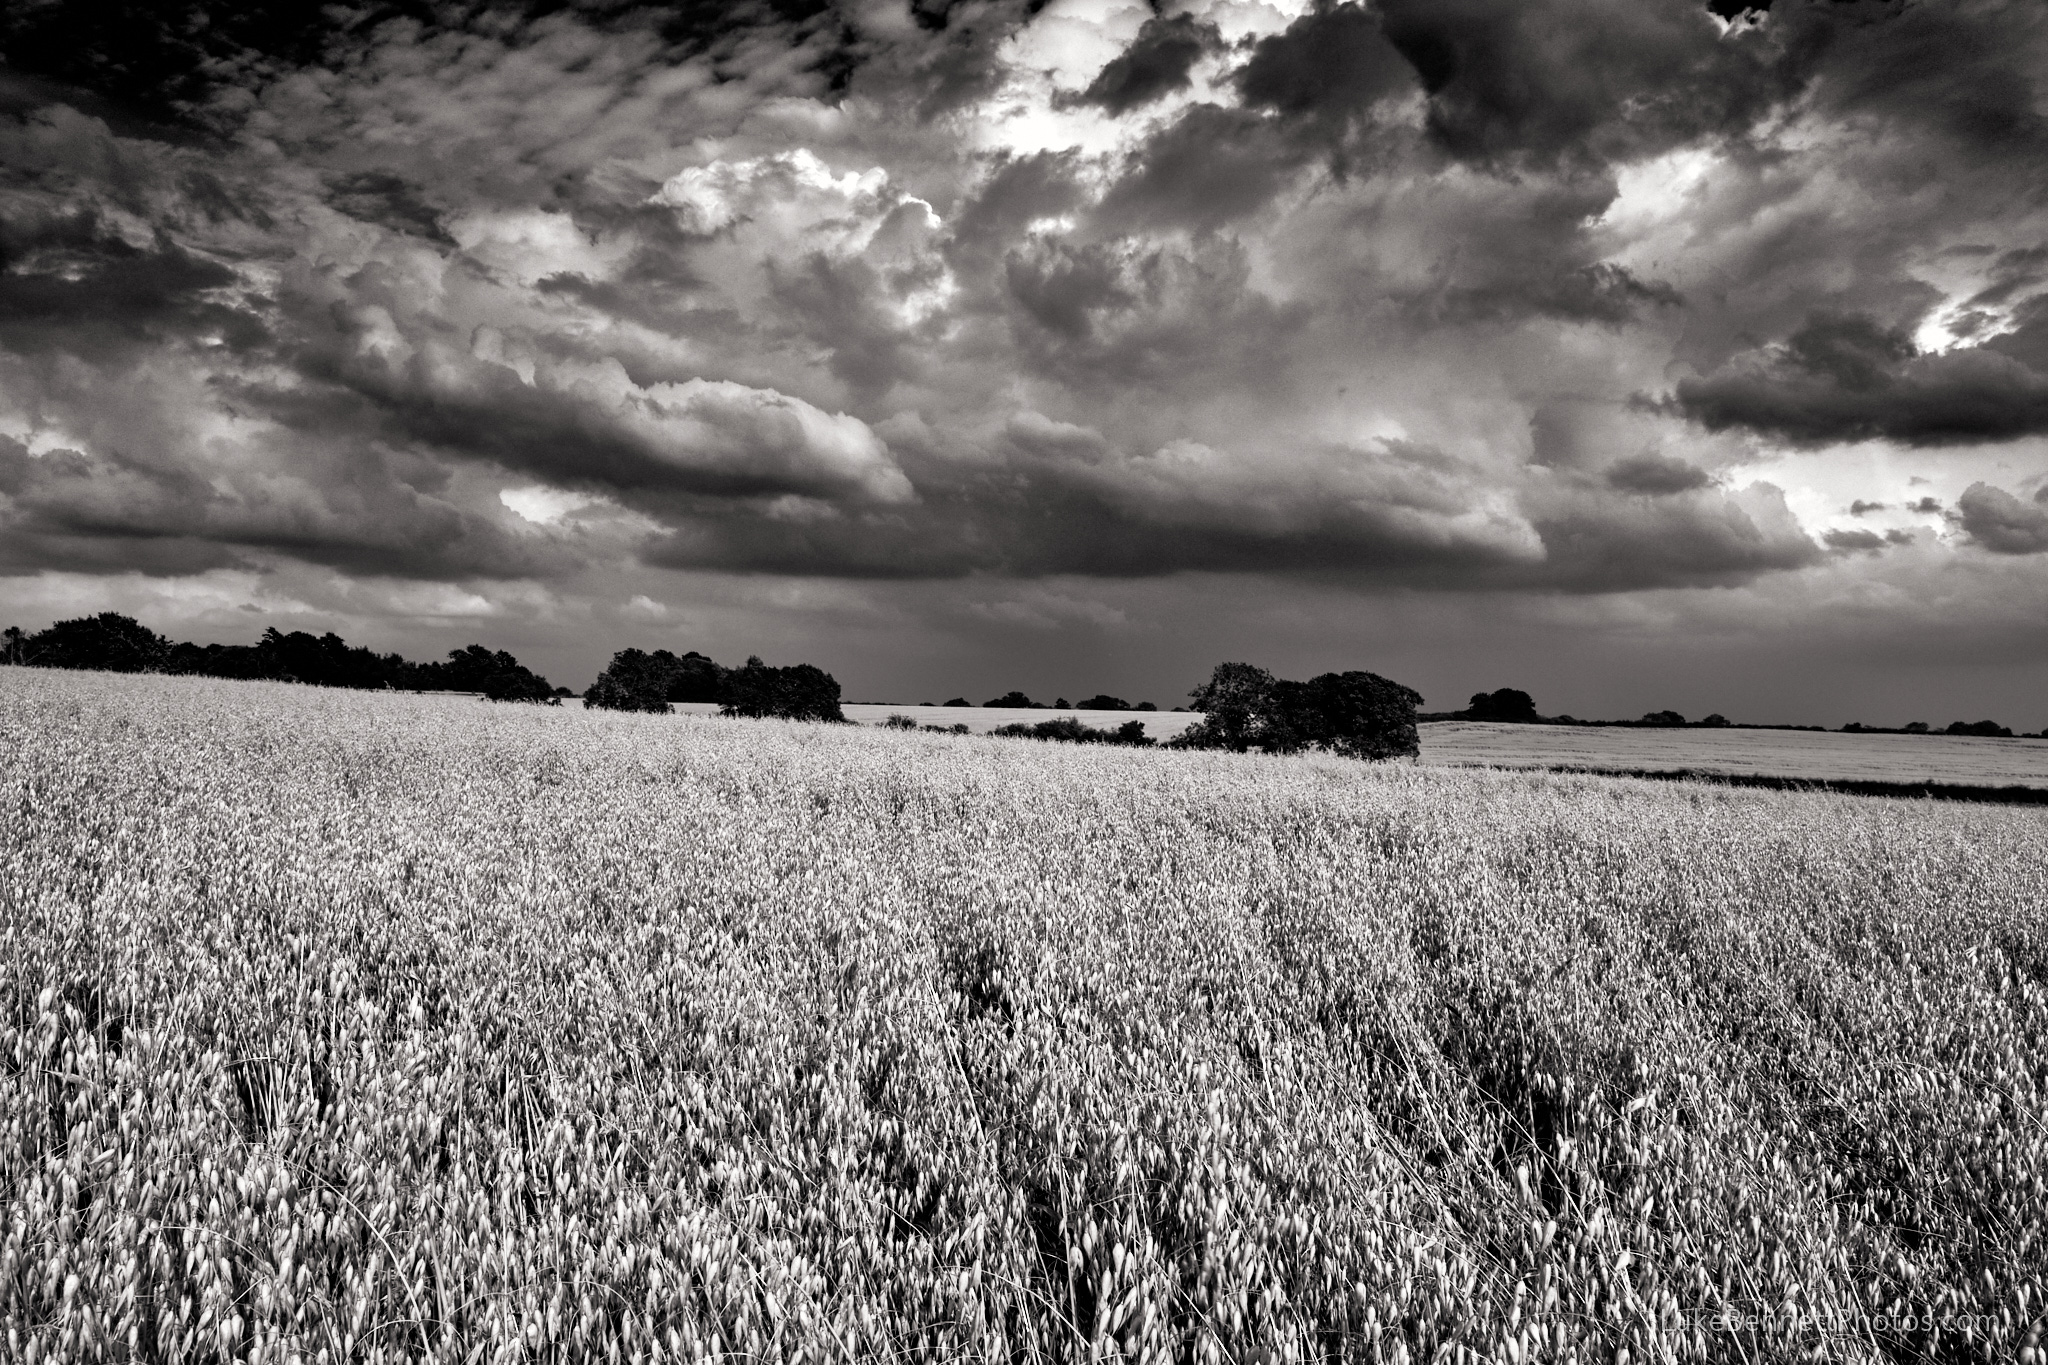 Storm clouds and oat fields